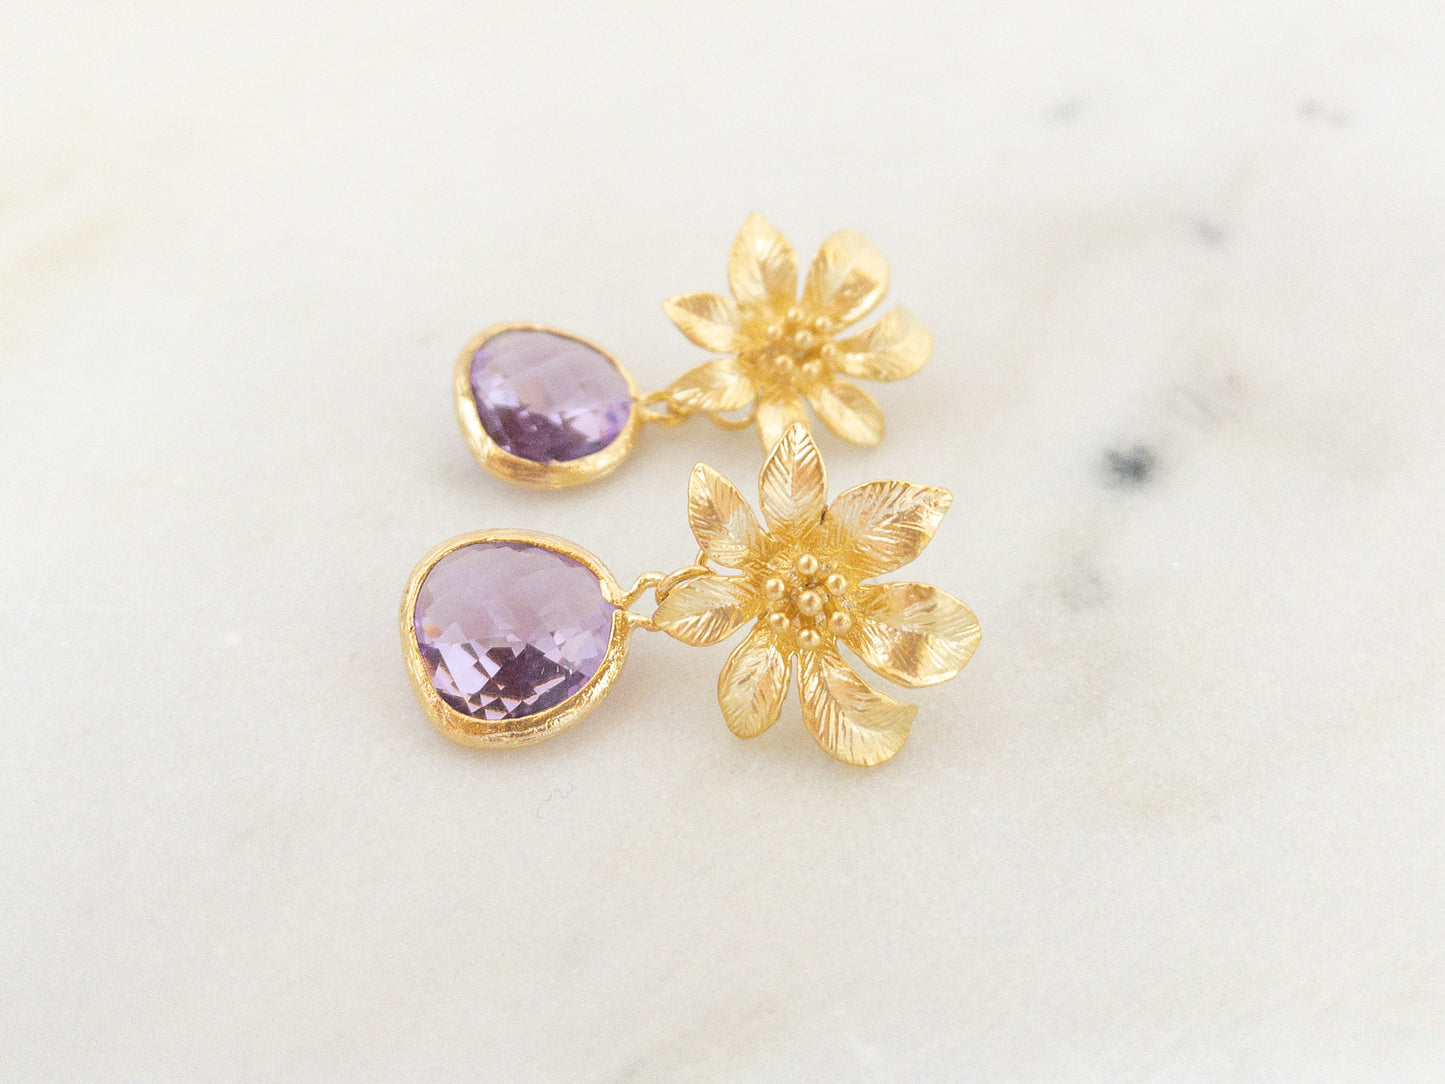 Gold Clematis Flower Earrings with Lilac Stones